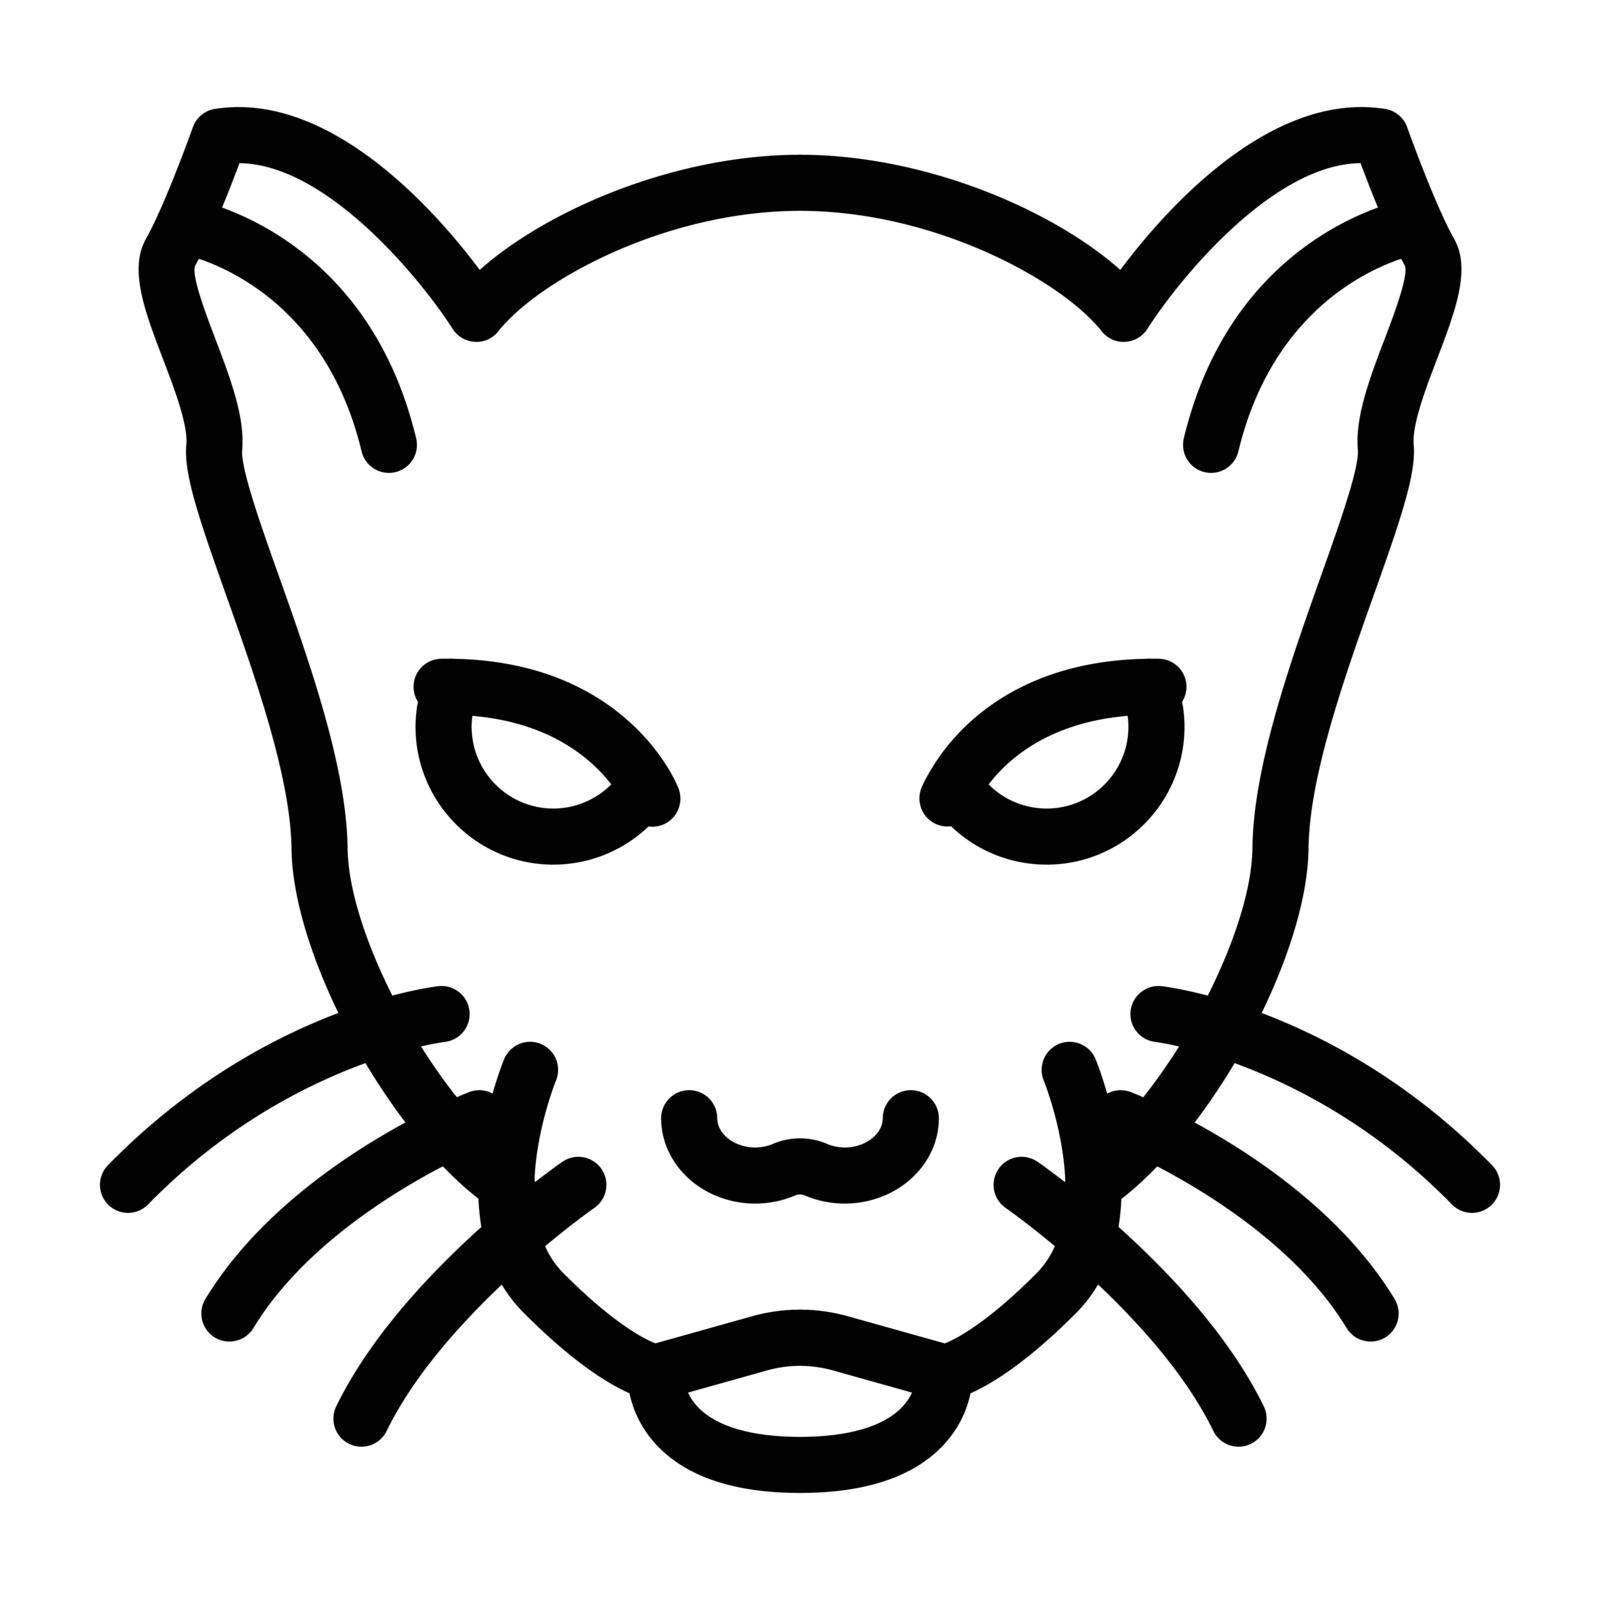 panther Vector illustration on a transparent background. Premium quality symbols. Gyliph vector icon for concept and graphic design.